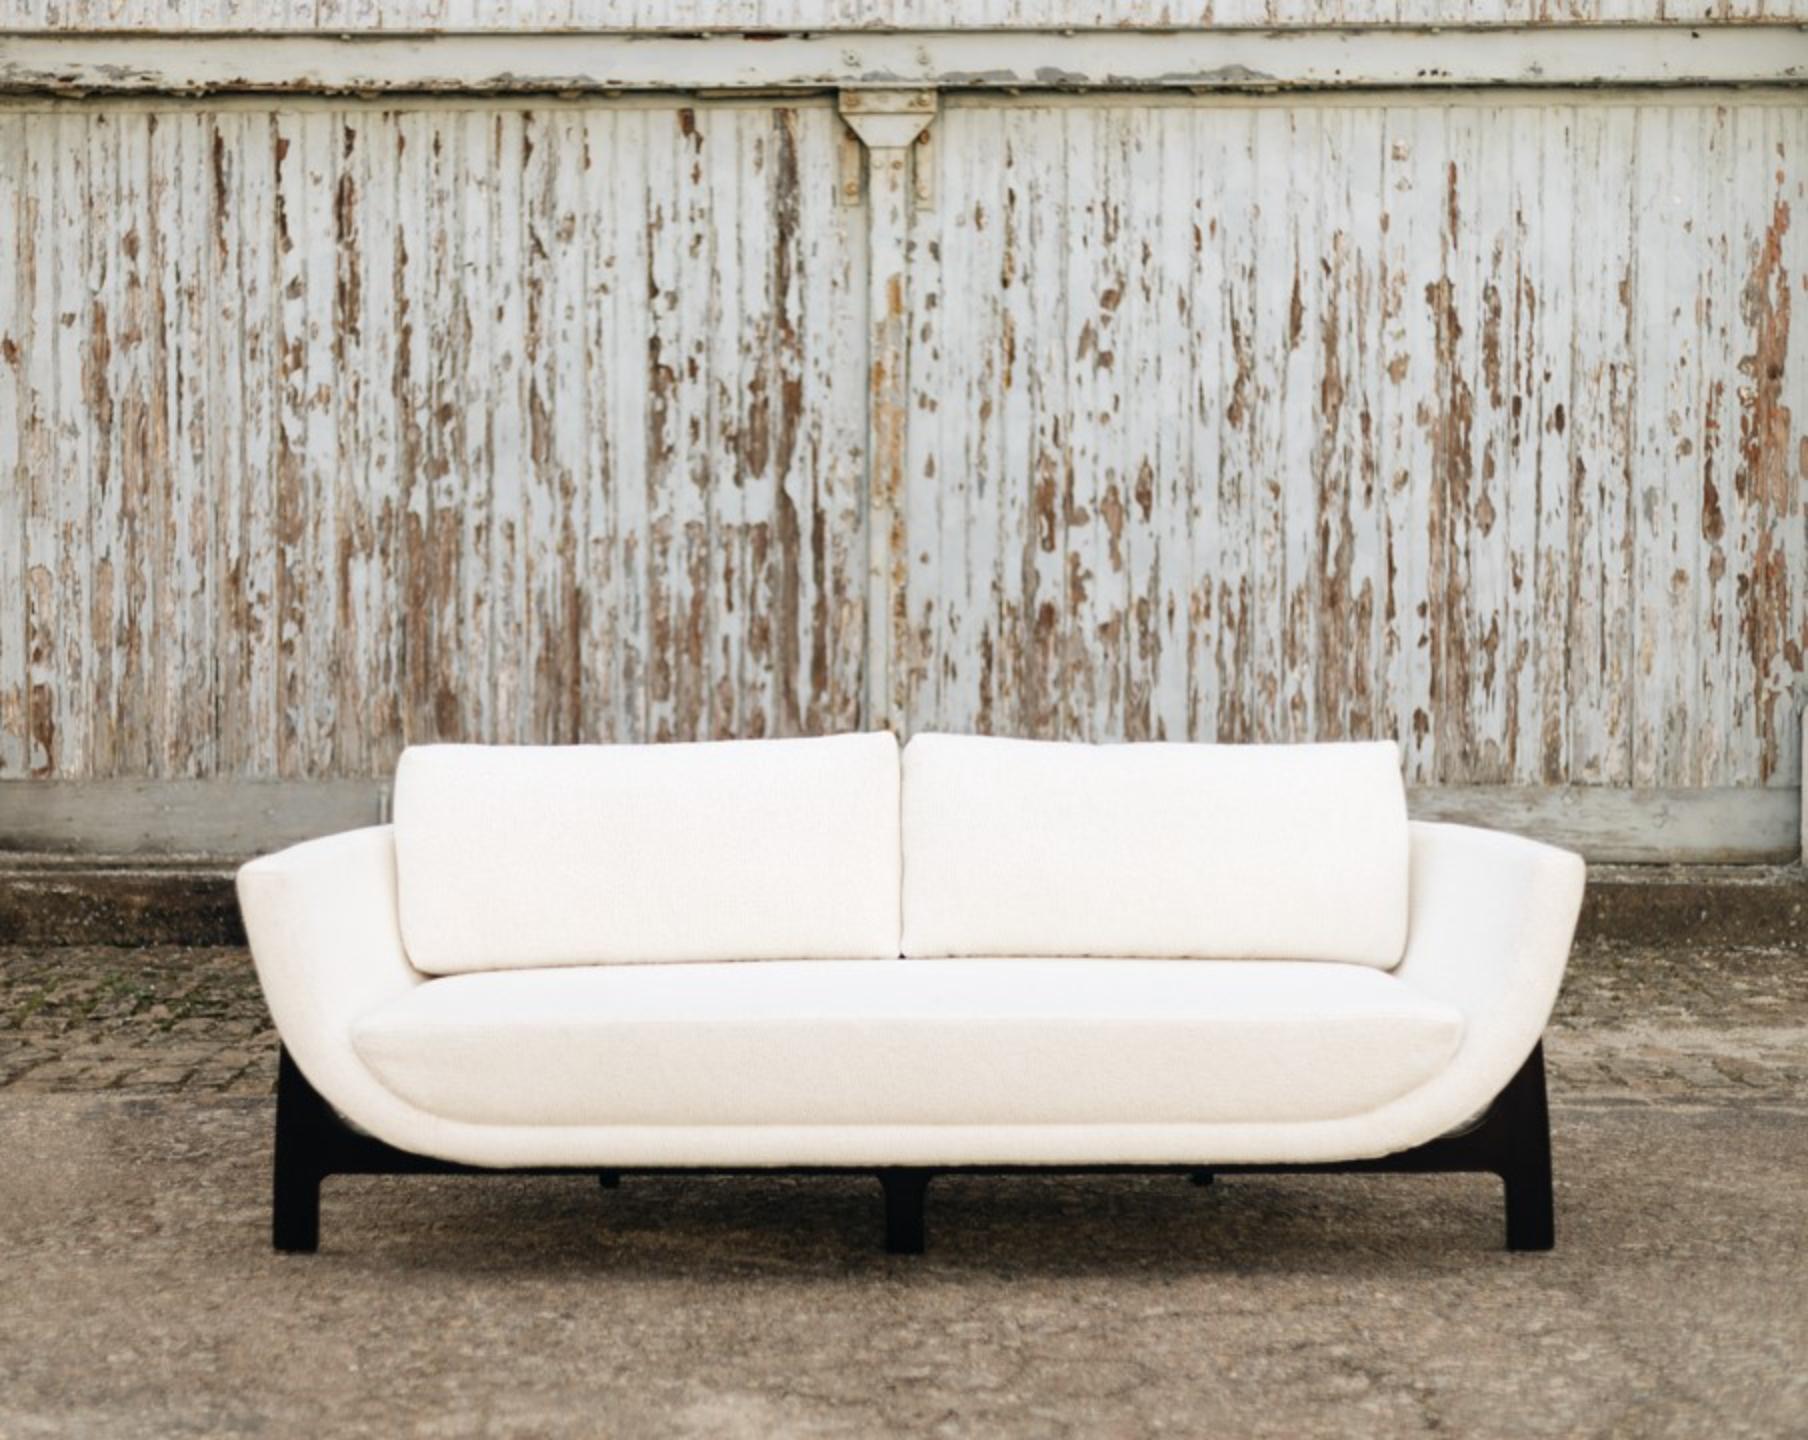 Wood Oscar Sofa by DUISTT 
Dimensions: W 210 x D 85 x H 76 cm
Materials: Fabric Pierre Frey Esteban Meringue, High Gloss Mahogany Wood

Inspired by the curved lines poetry of Oscar Niemeyer’s architecture, the OSCAR wood sofa allures for its sensual